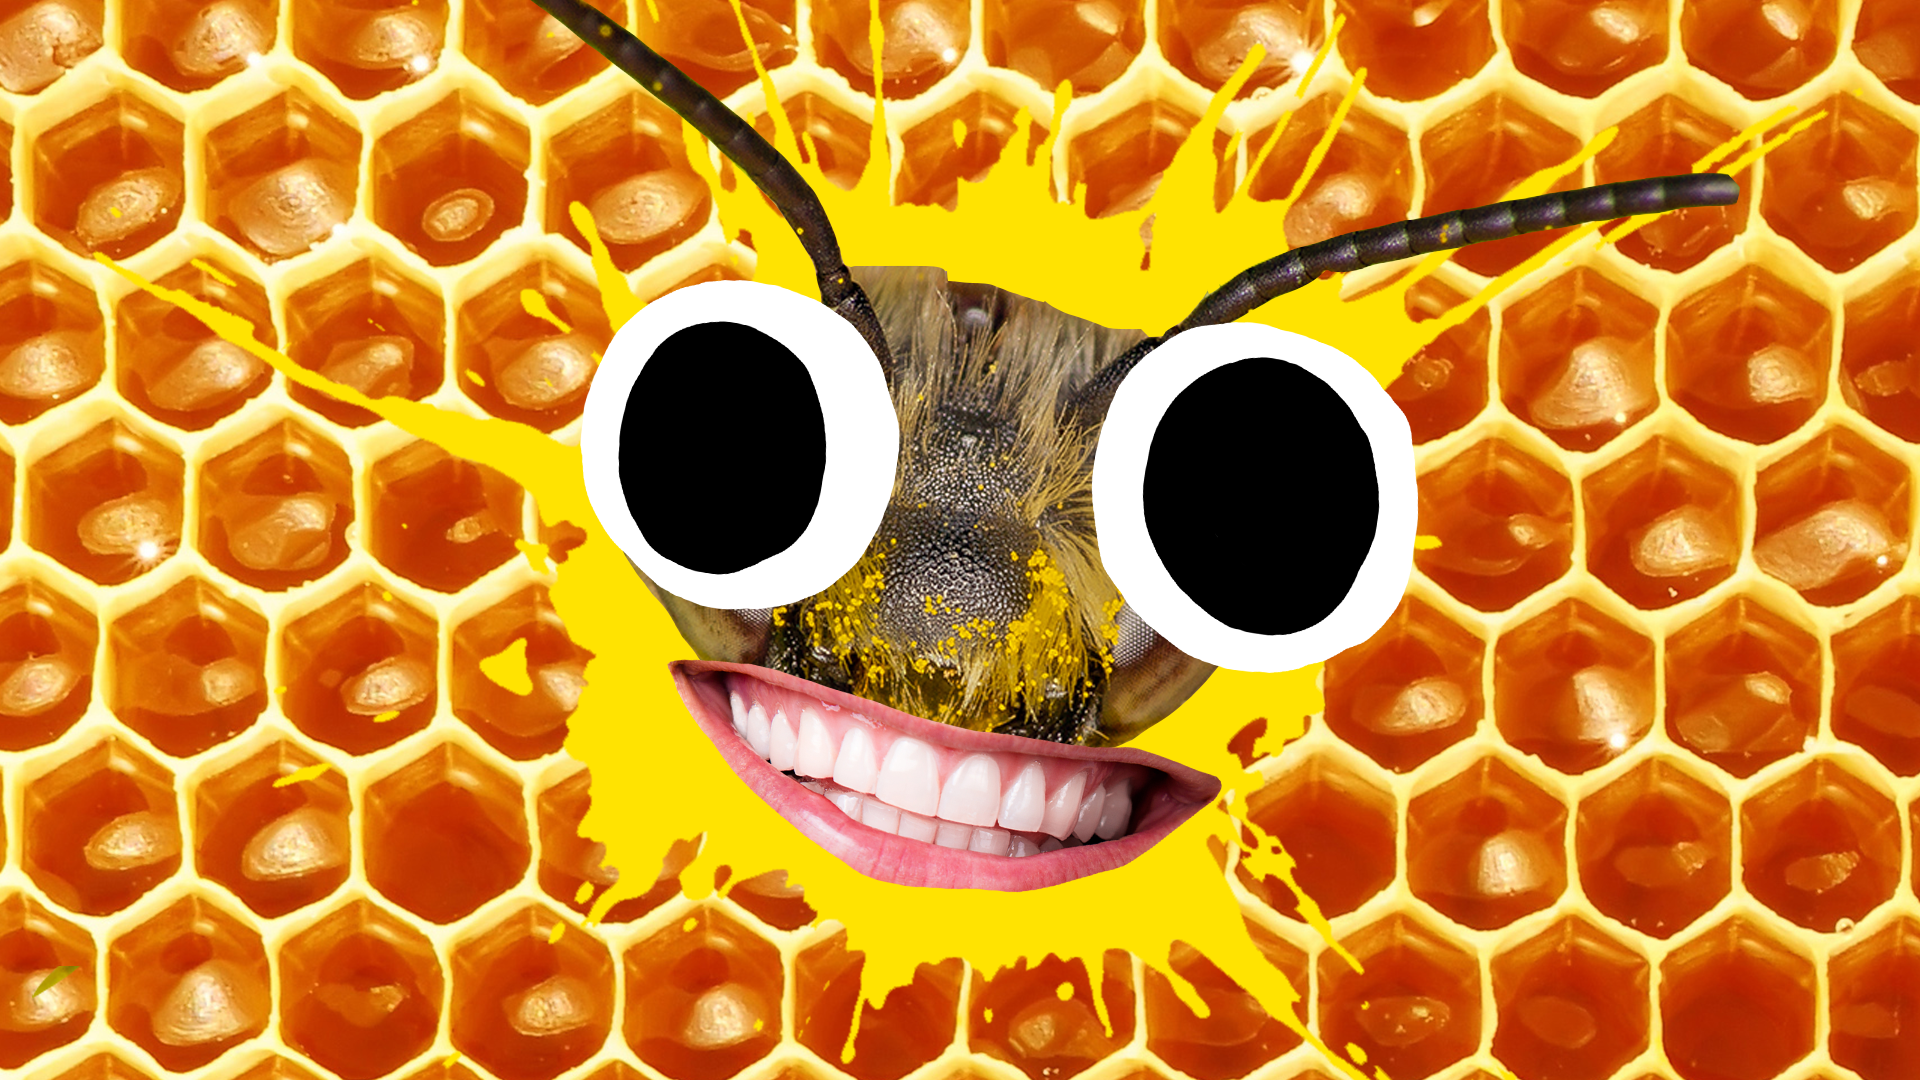 Grinning bee face on yellow splat and honeycomb background